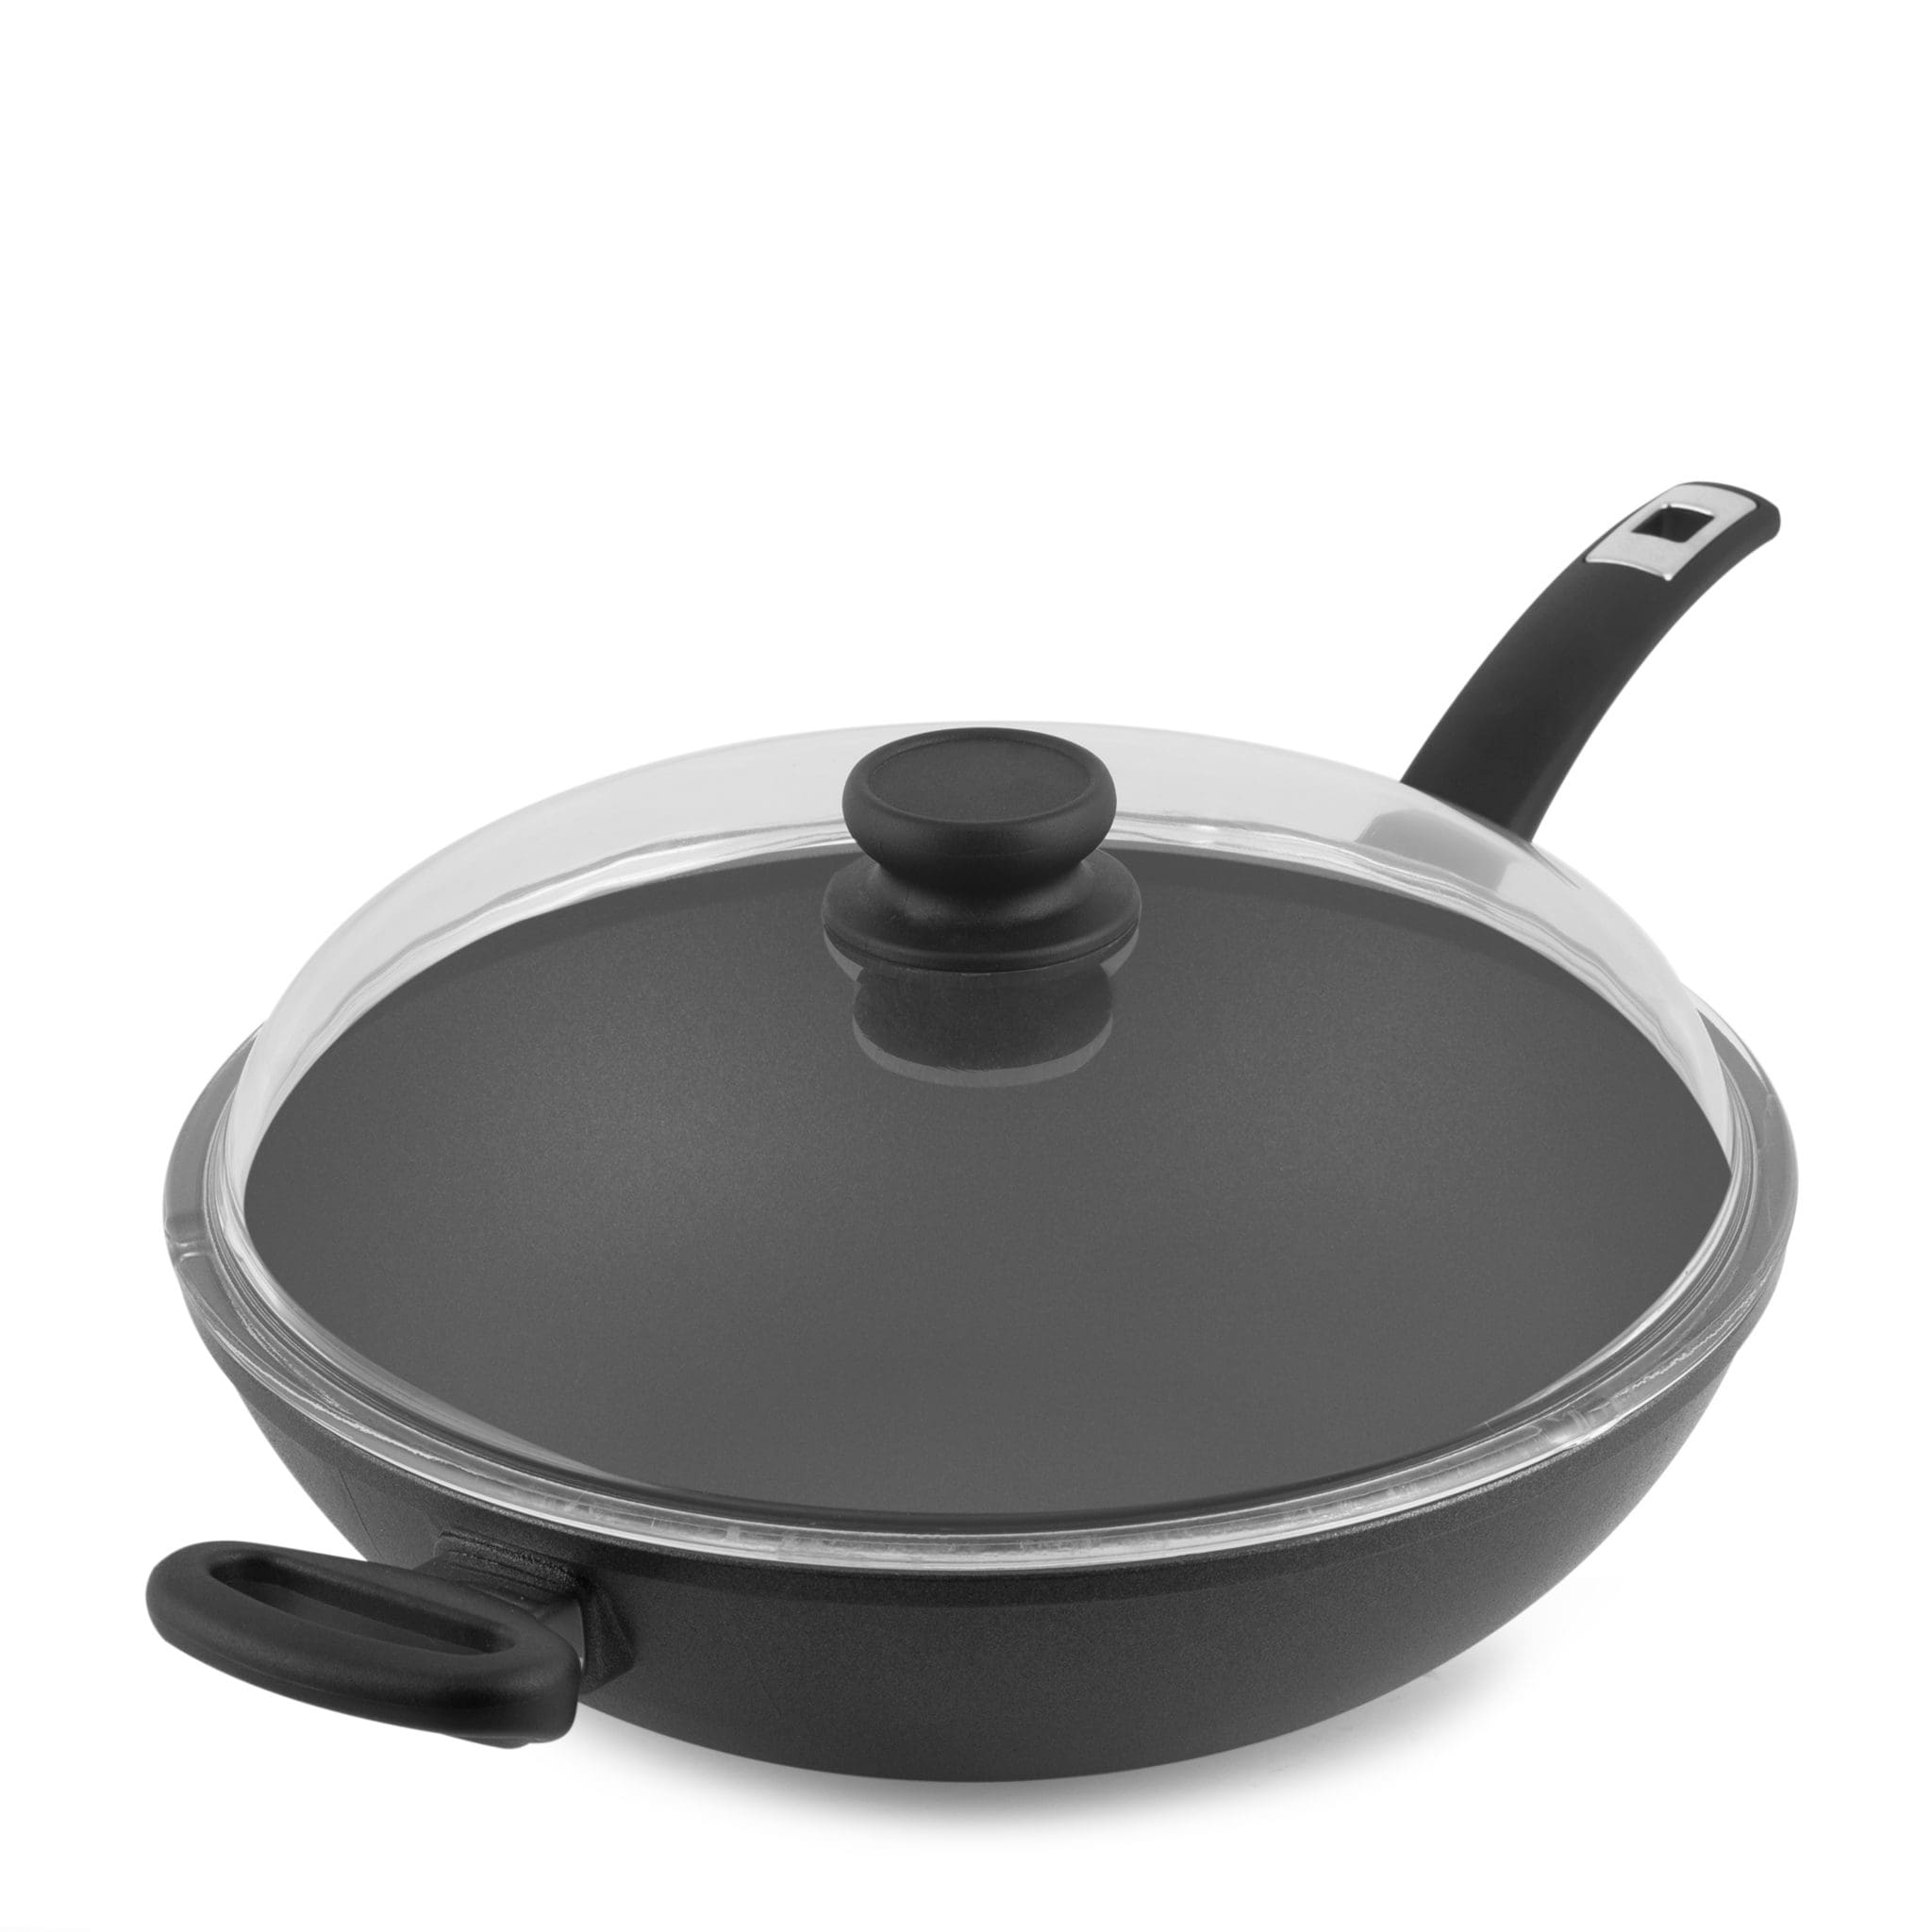 Get Aroma Non-Stick Stainless Steel Wok Pan with Self-Balancing